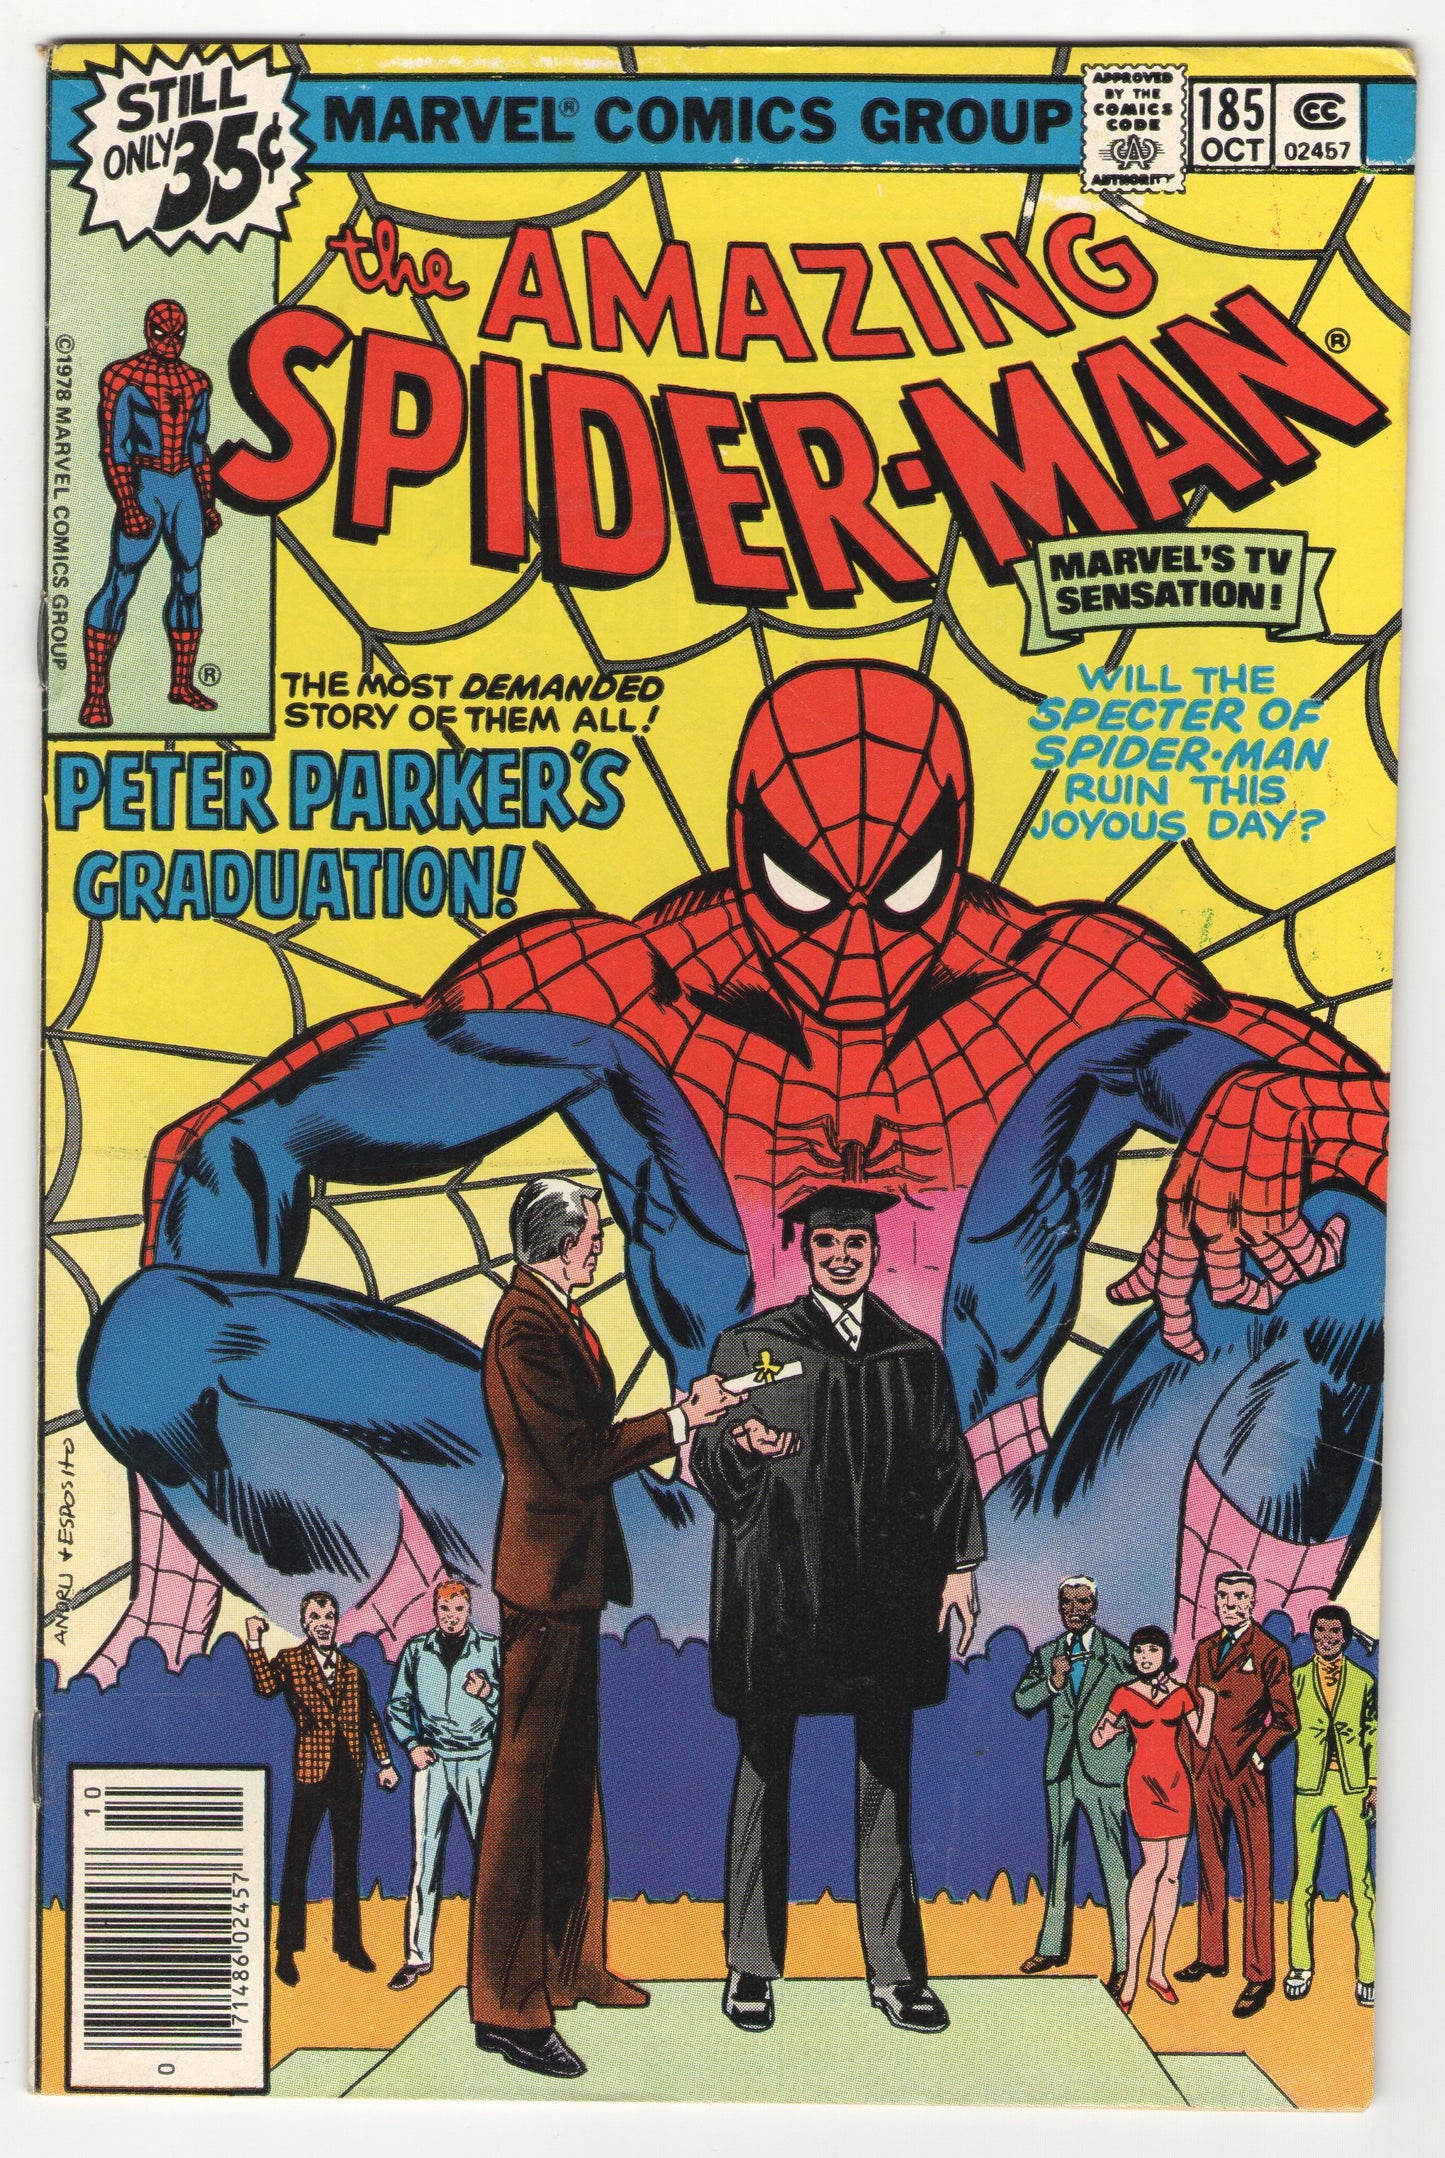 Amazing Spider-Man #184-185 (1978) Complete White Dragon Story Arc